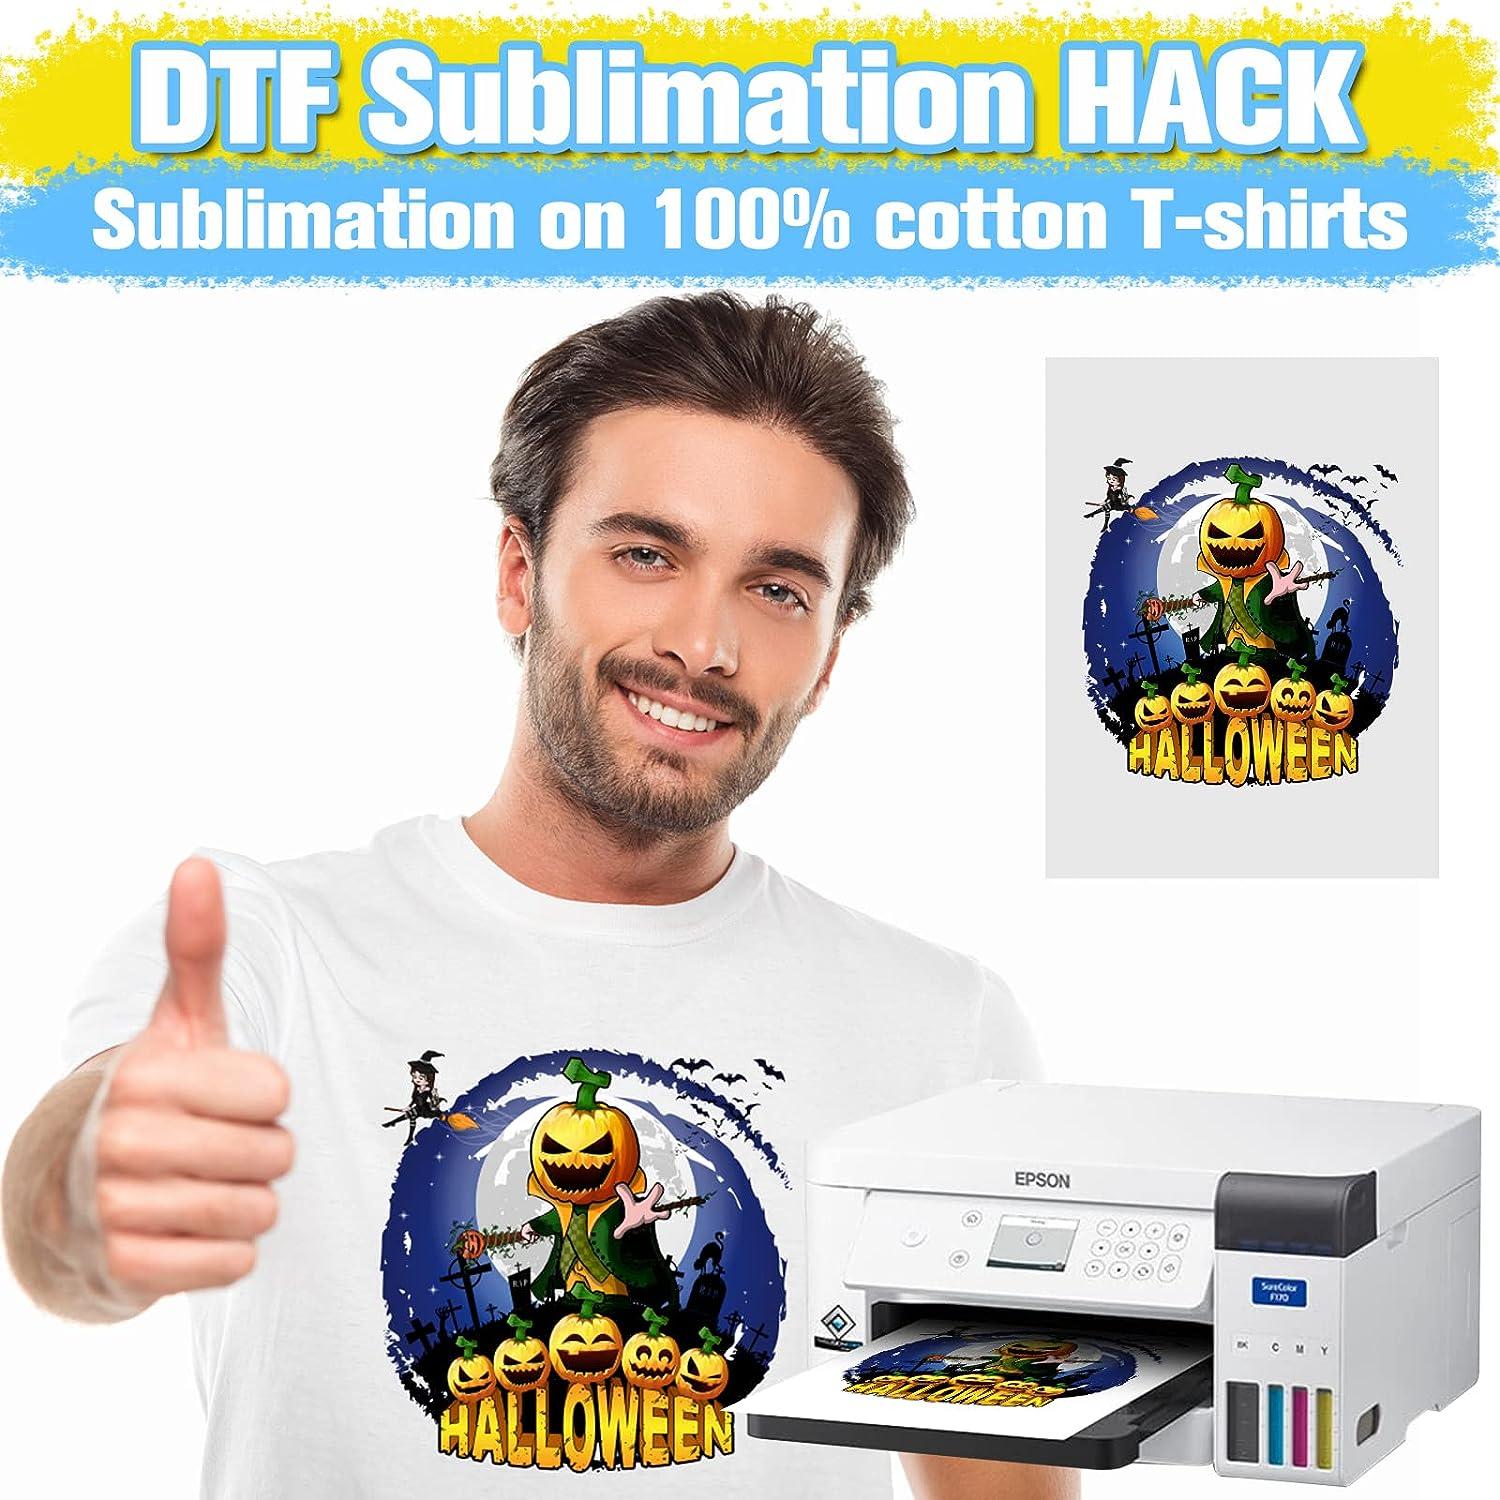 Using a Sublimation Printer to Make DTF Transfers with DTF Film